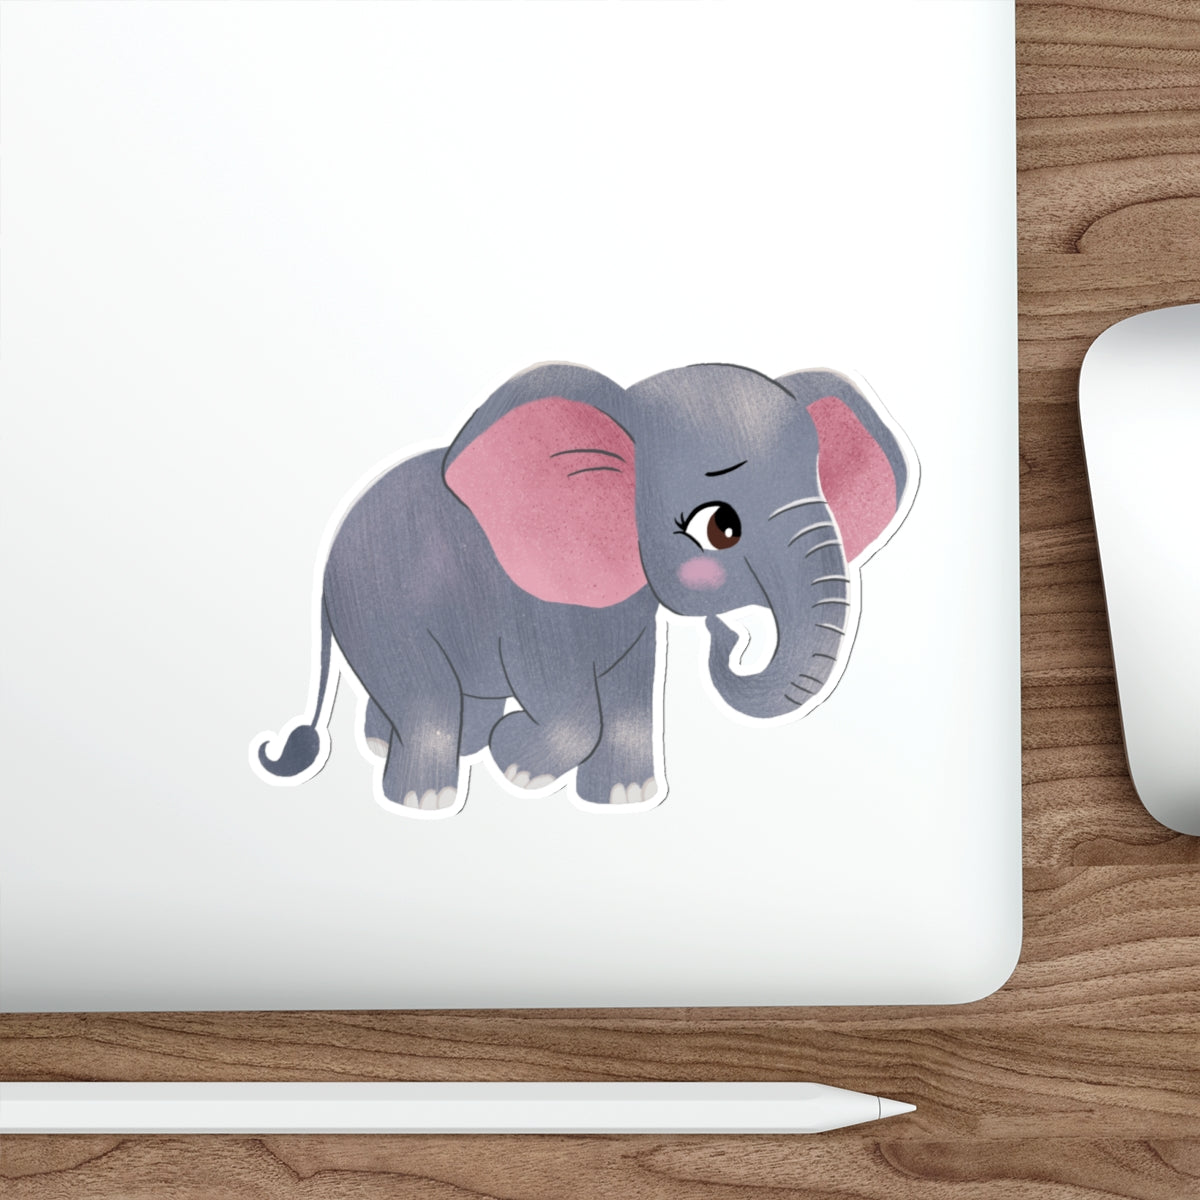 Stickers of Amara the Baby Elephant | Die-Cut Elephant Stickers | Outdoor and Indoor Stickers | Water-resistant Stickers